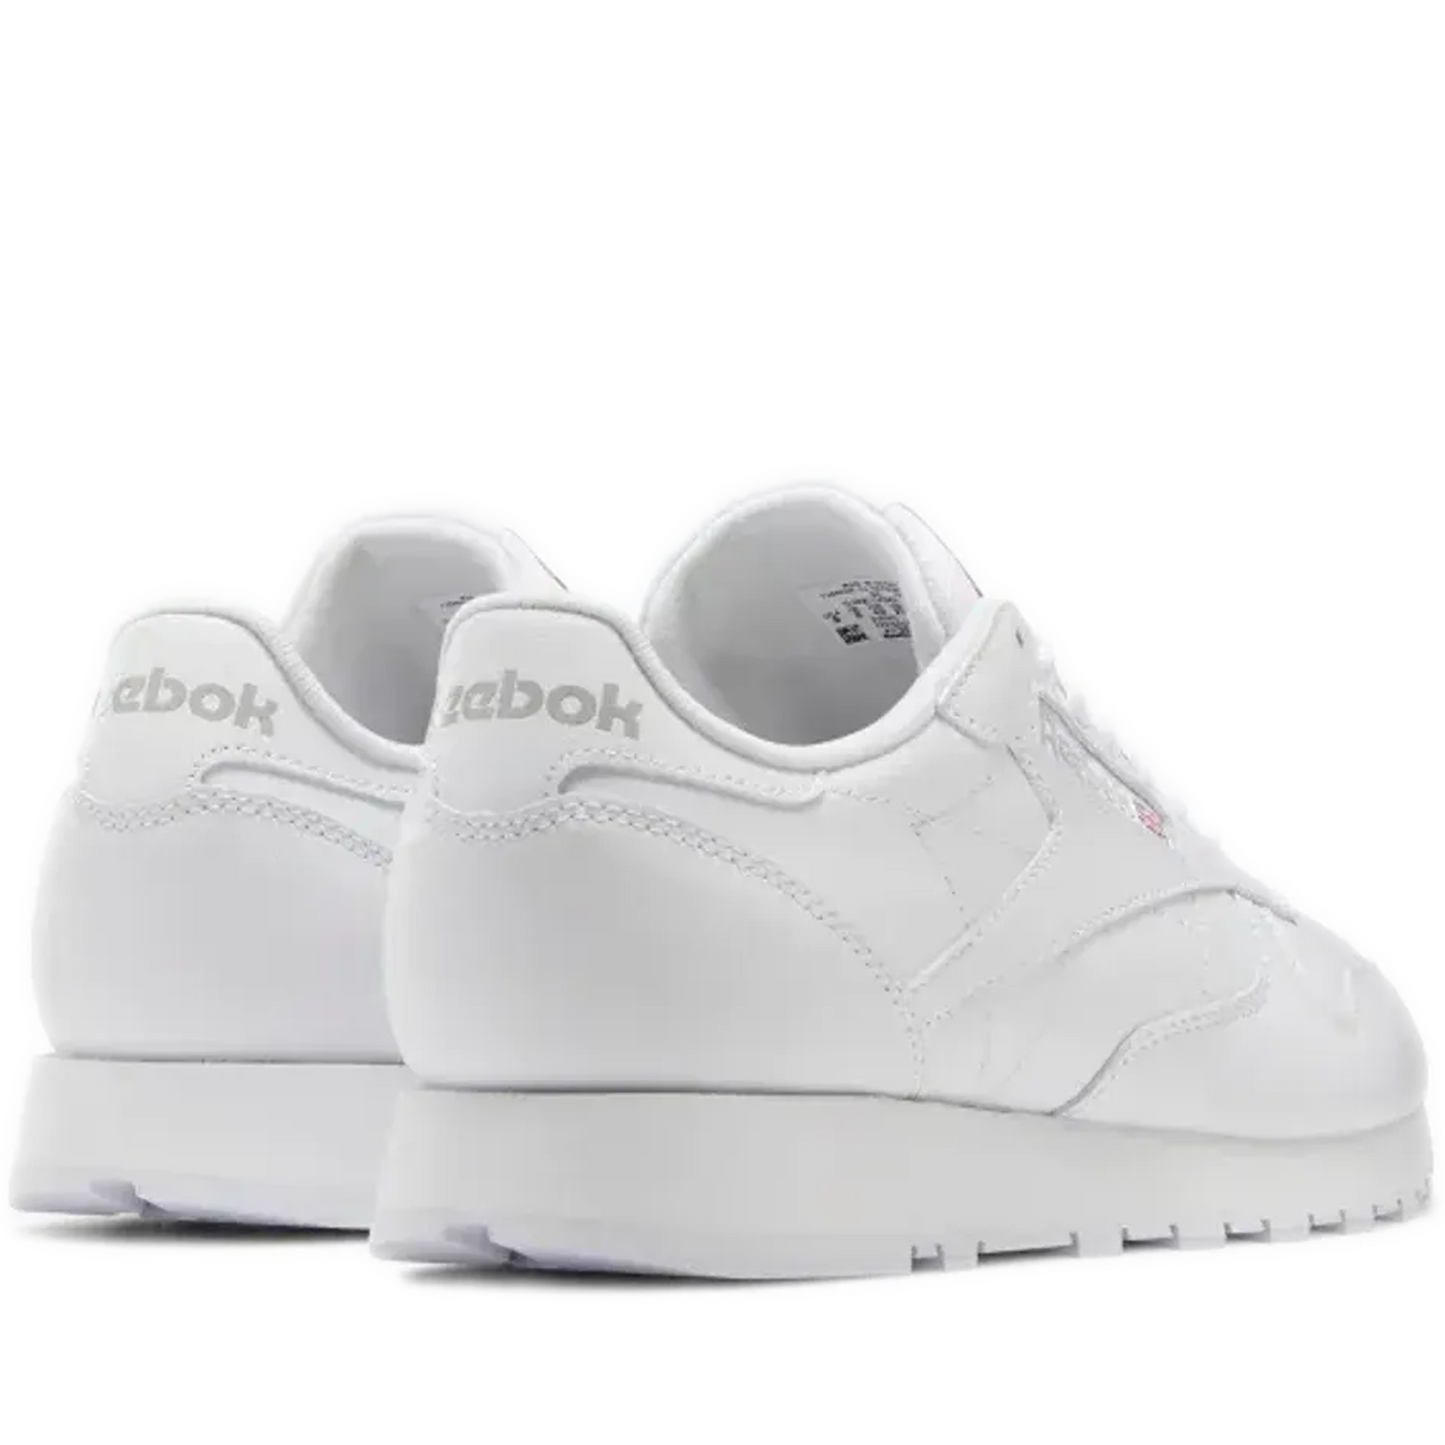 Men's Reebok Classic Leather Shoes - Ftwr White / Ftwr White / Pure Grey 3